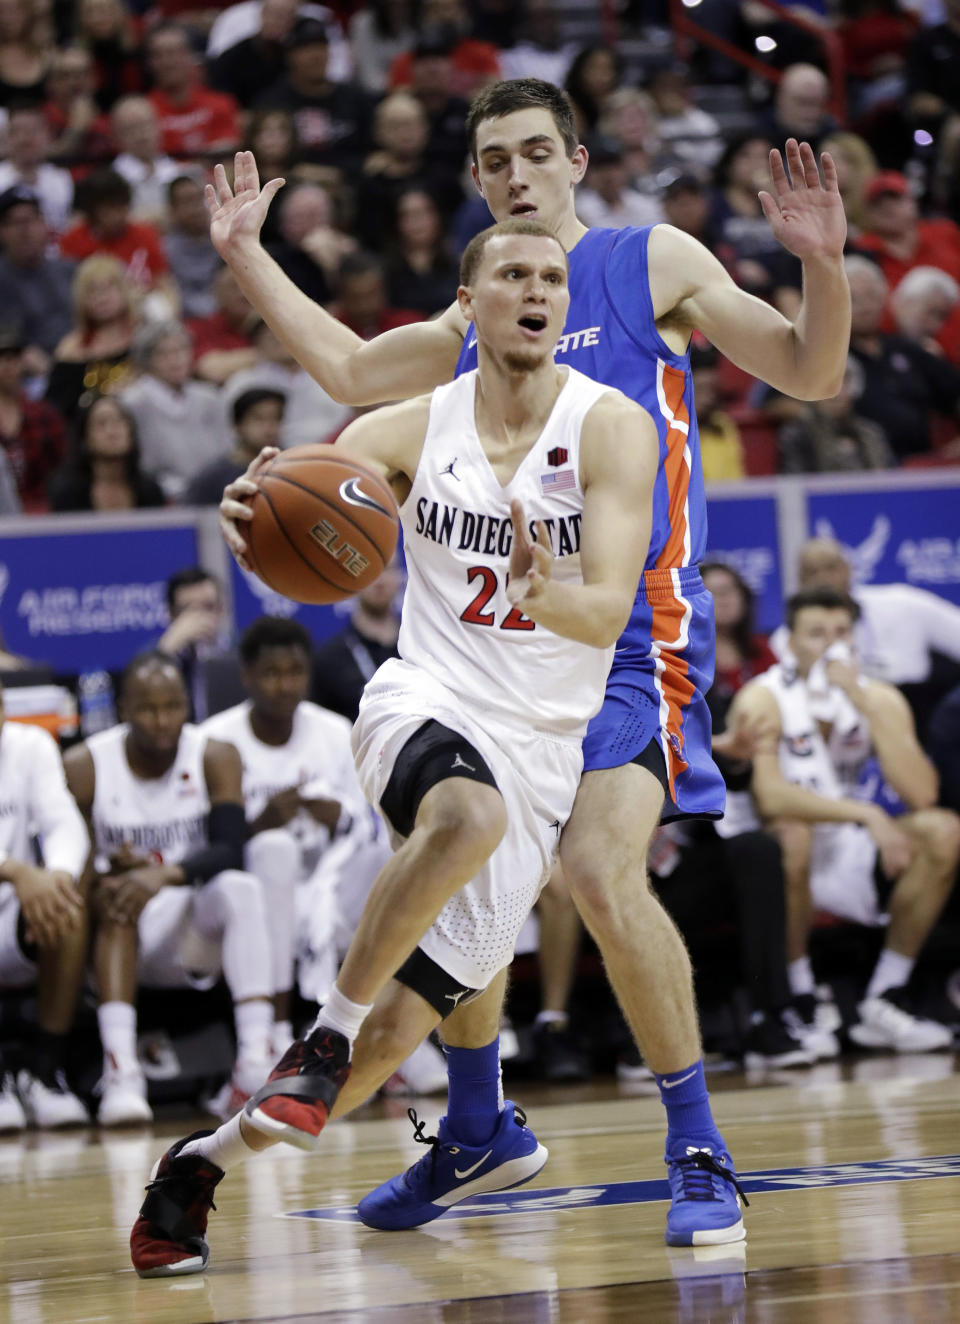 San Diego State's Malachi Flynn (22) drives to the hoop as Boise State's Justinian Jessup defends during the second half of an NCAA college basketball game in the Mountain West Conference men's tournament Friday, March 6, 2020, in Las Vegas. (AP Photo/Isaac Brekken)